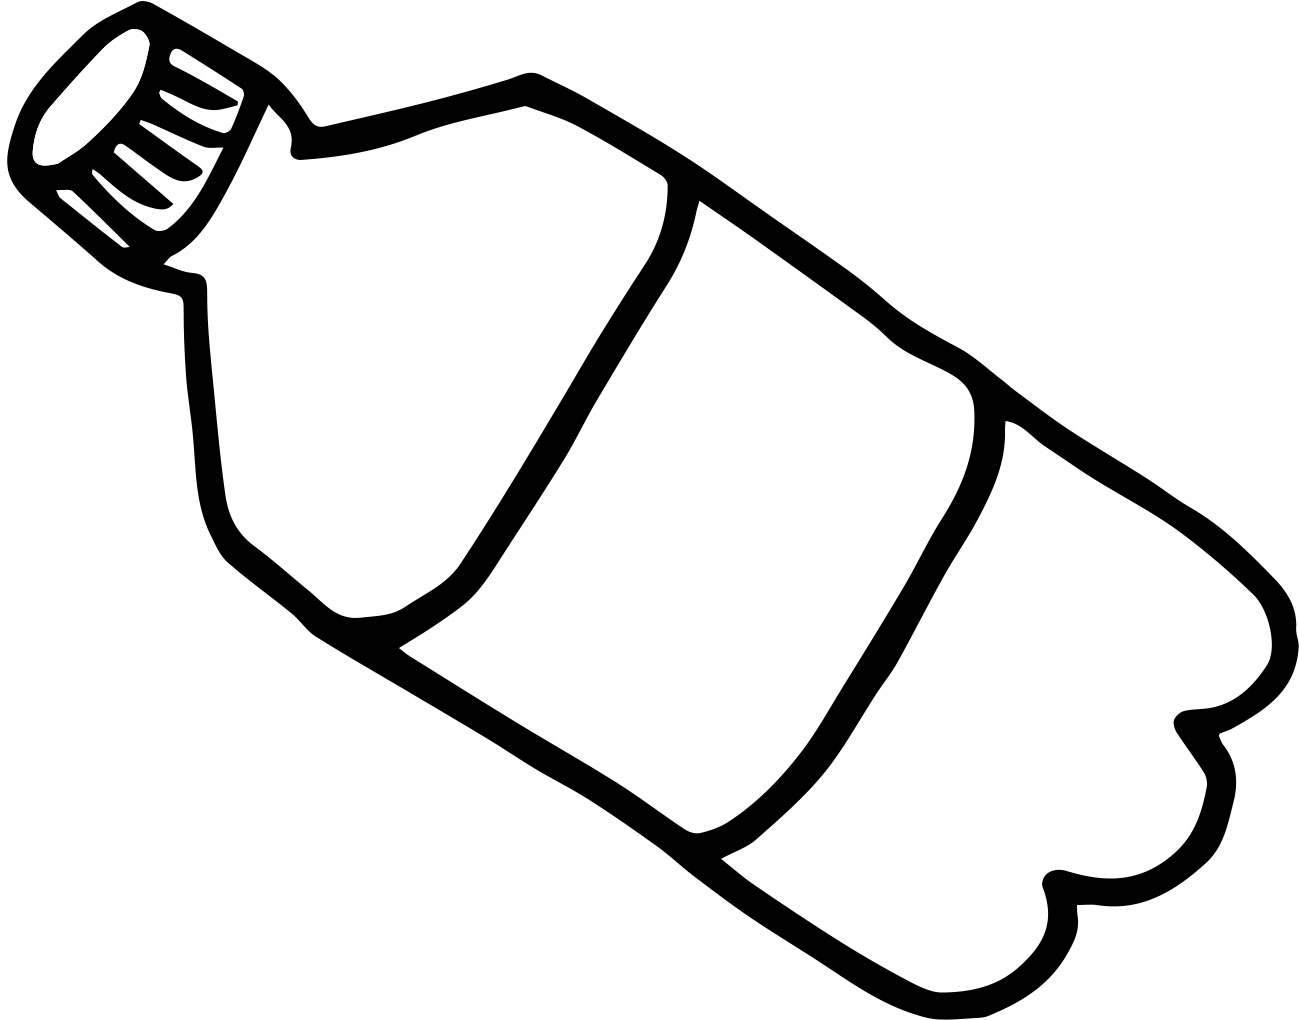 bottle of water clipart black and white